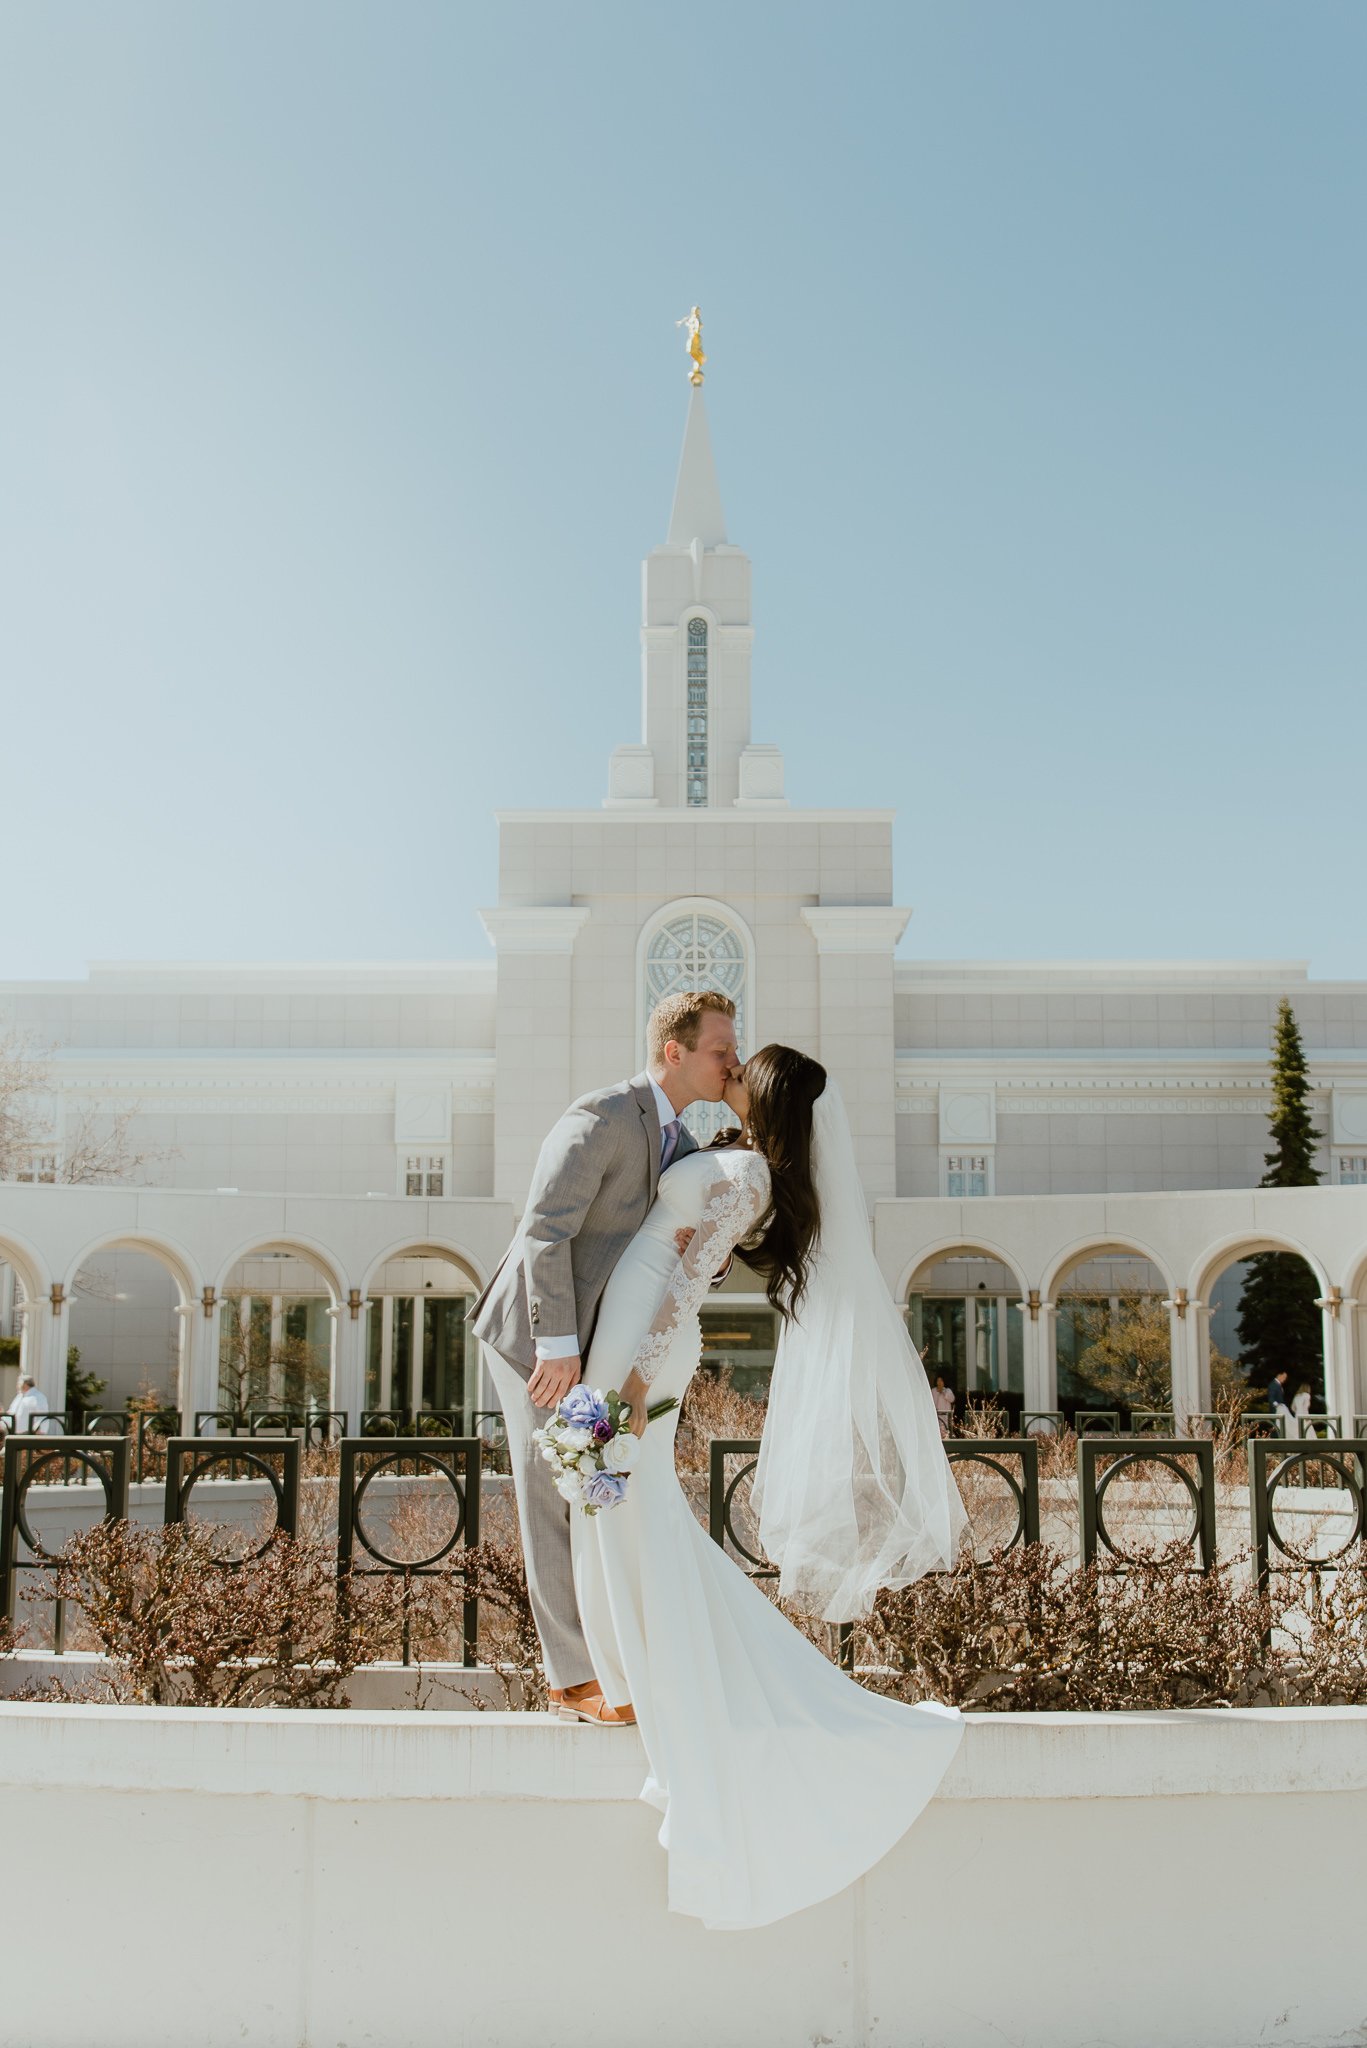 Utah-State-Capitol-Spring-Blossons-Bountiful-LDS-Wedding-Hopesandcheers-photo-26